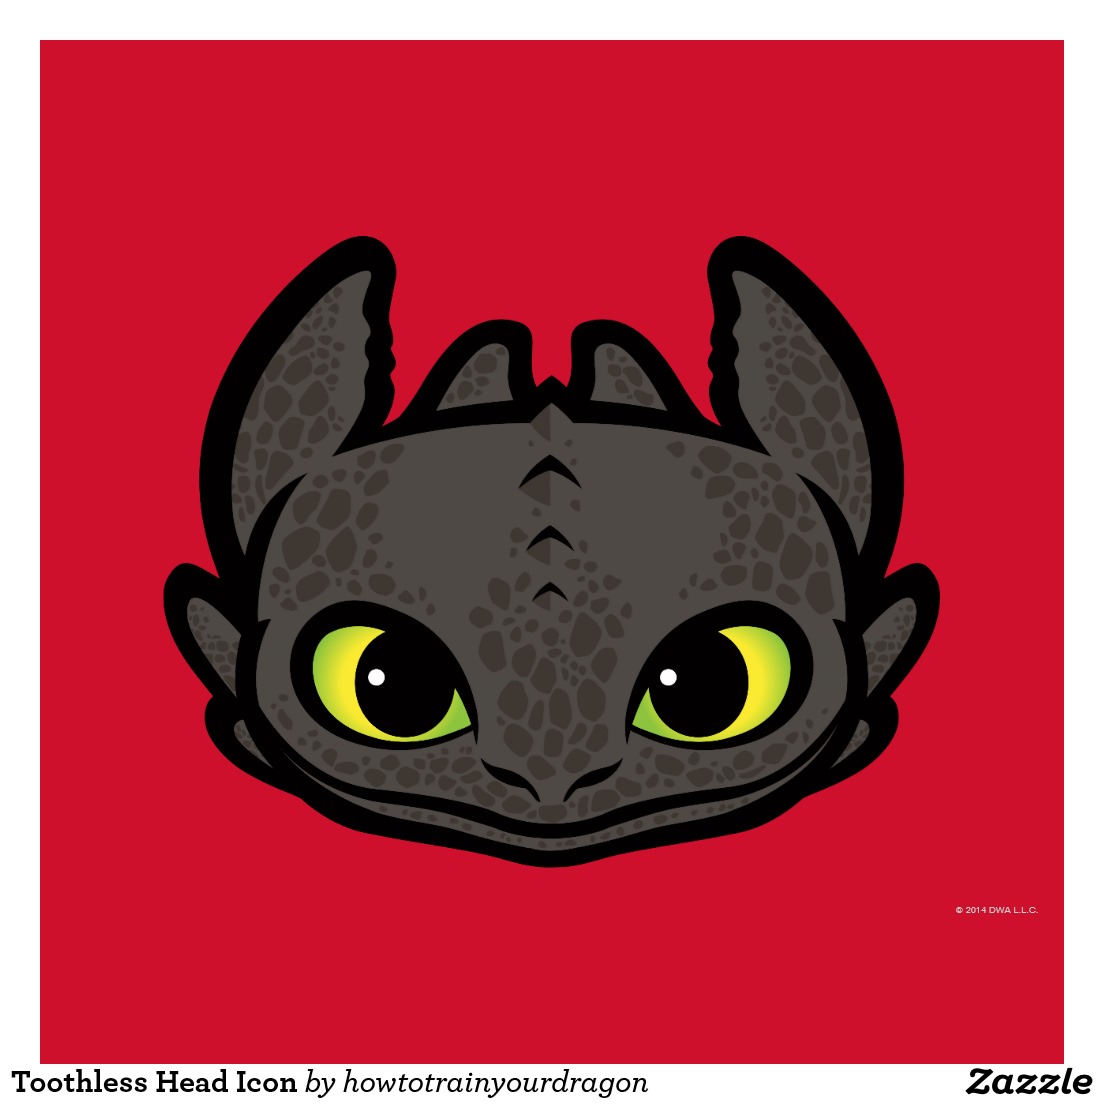 How to Train Your Dragon 2 Toothless Icon 1 Inch Button | eBay